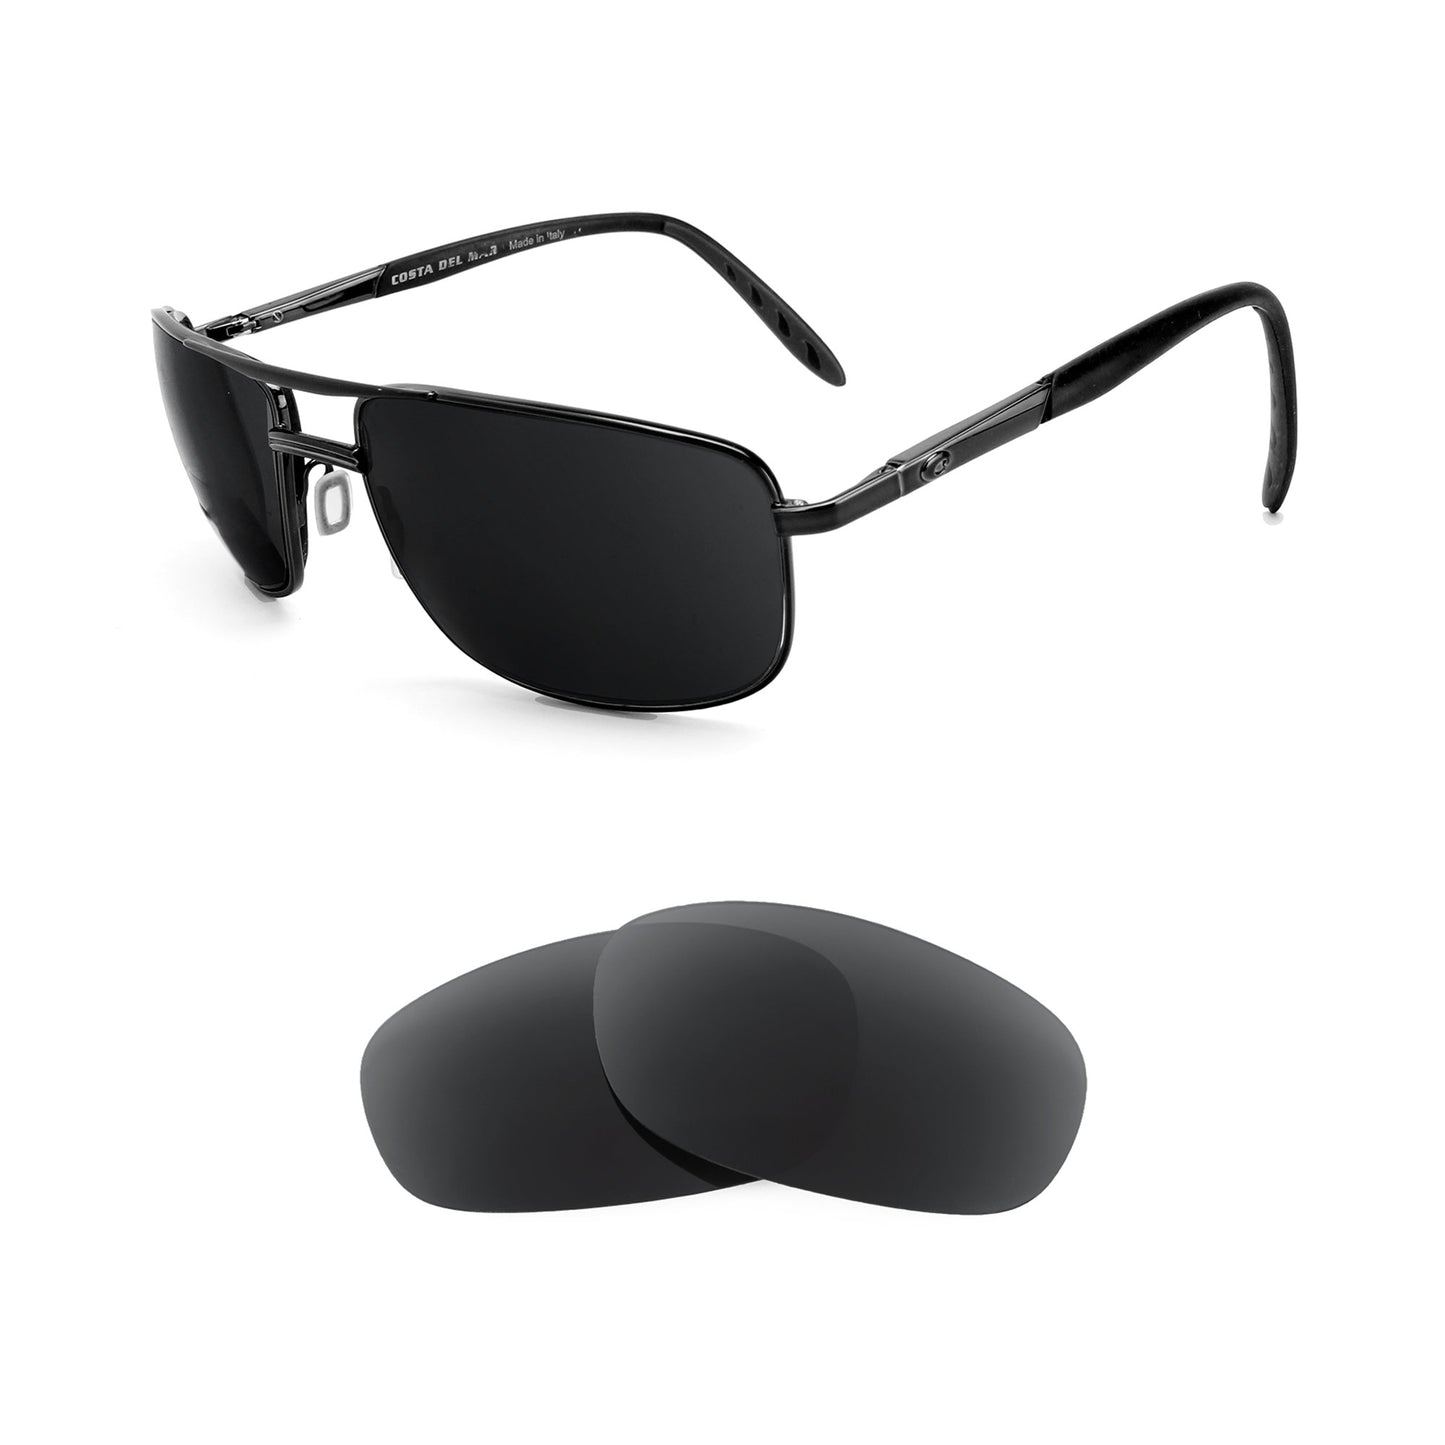 Revo Transmit RE9014 sunglasses with replacement lenses